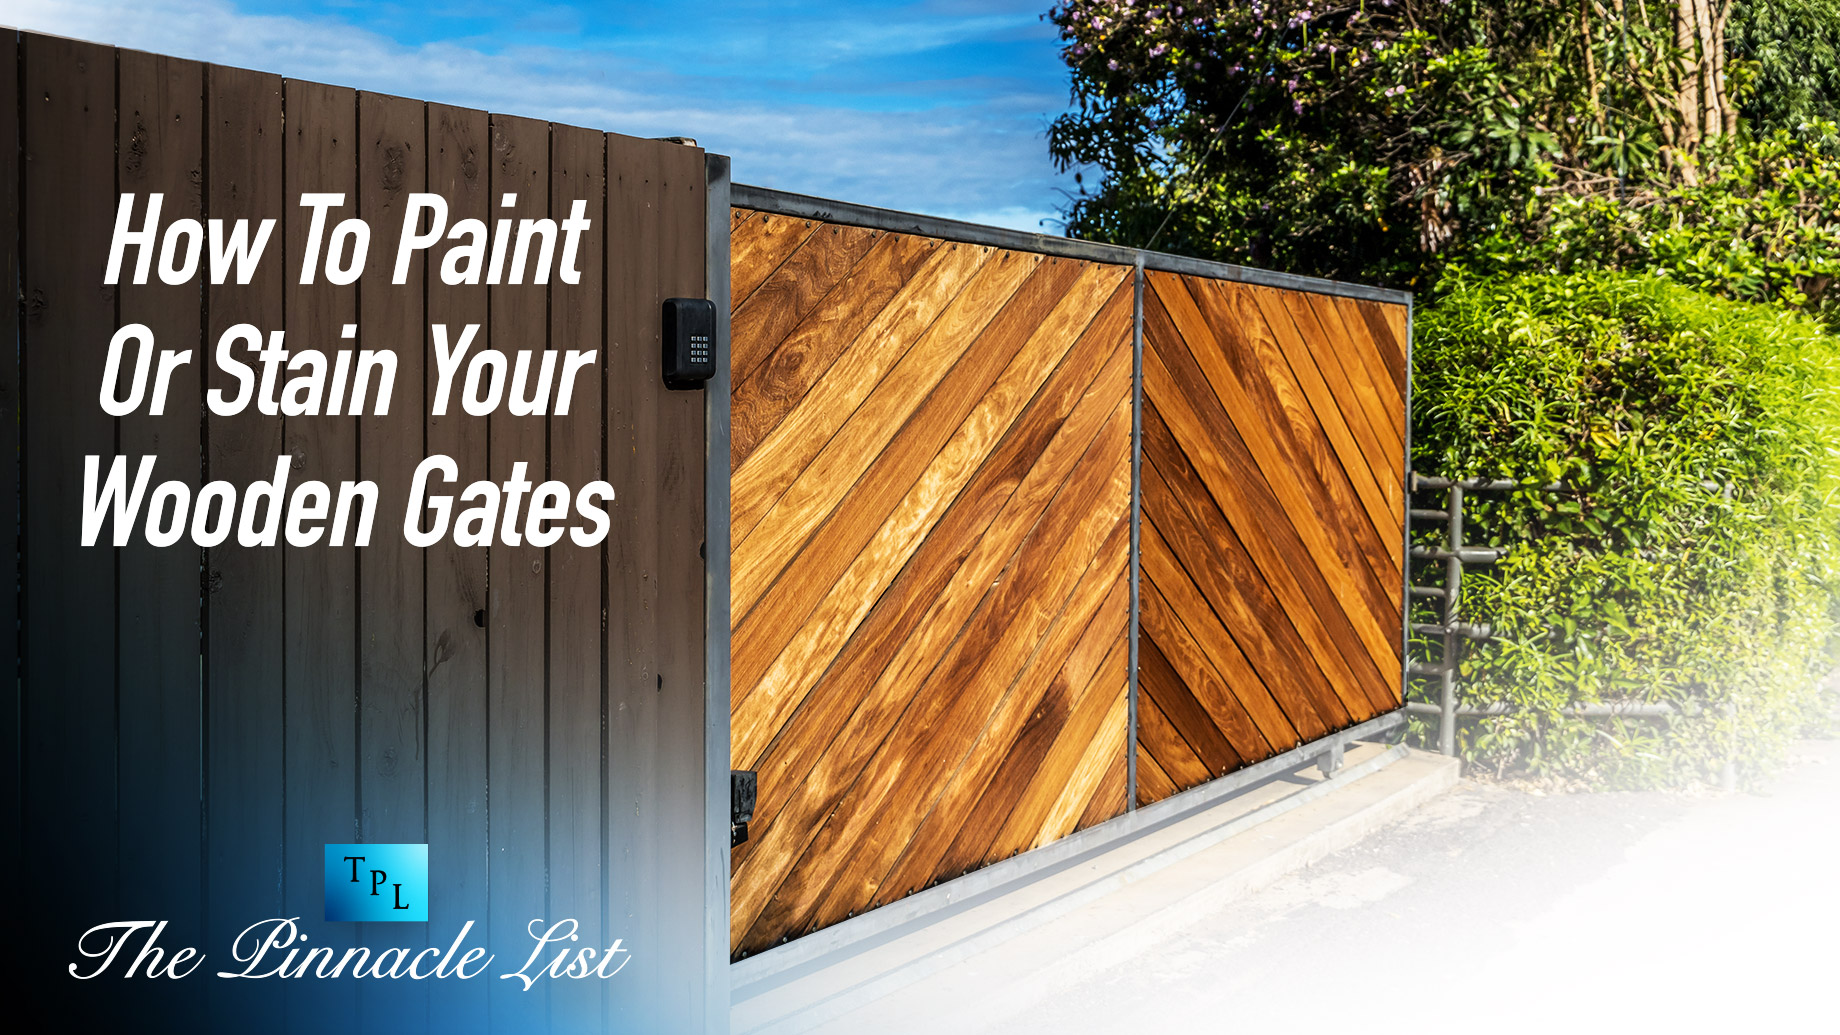 How To Paint Or Stain Your Wooden Gates